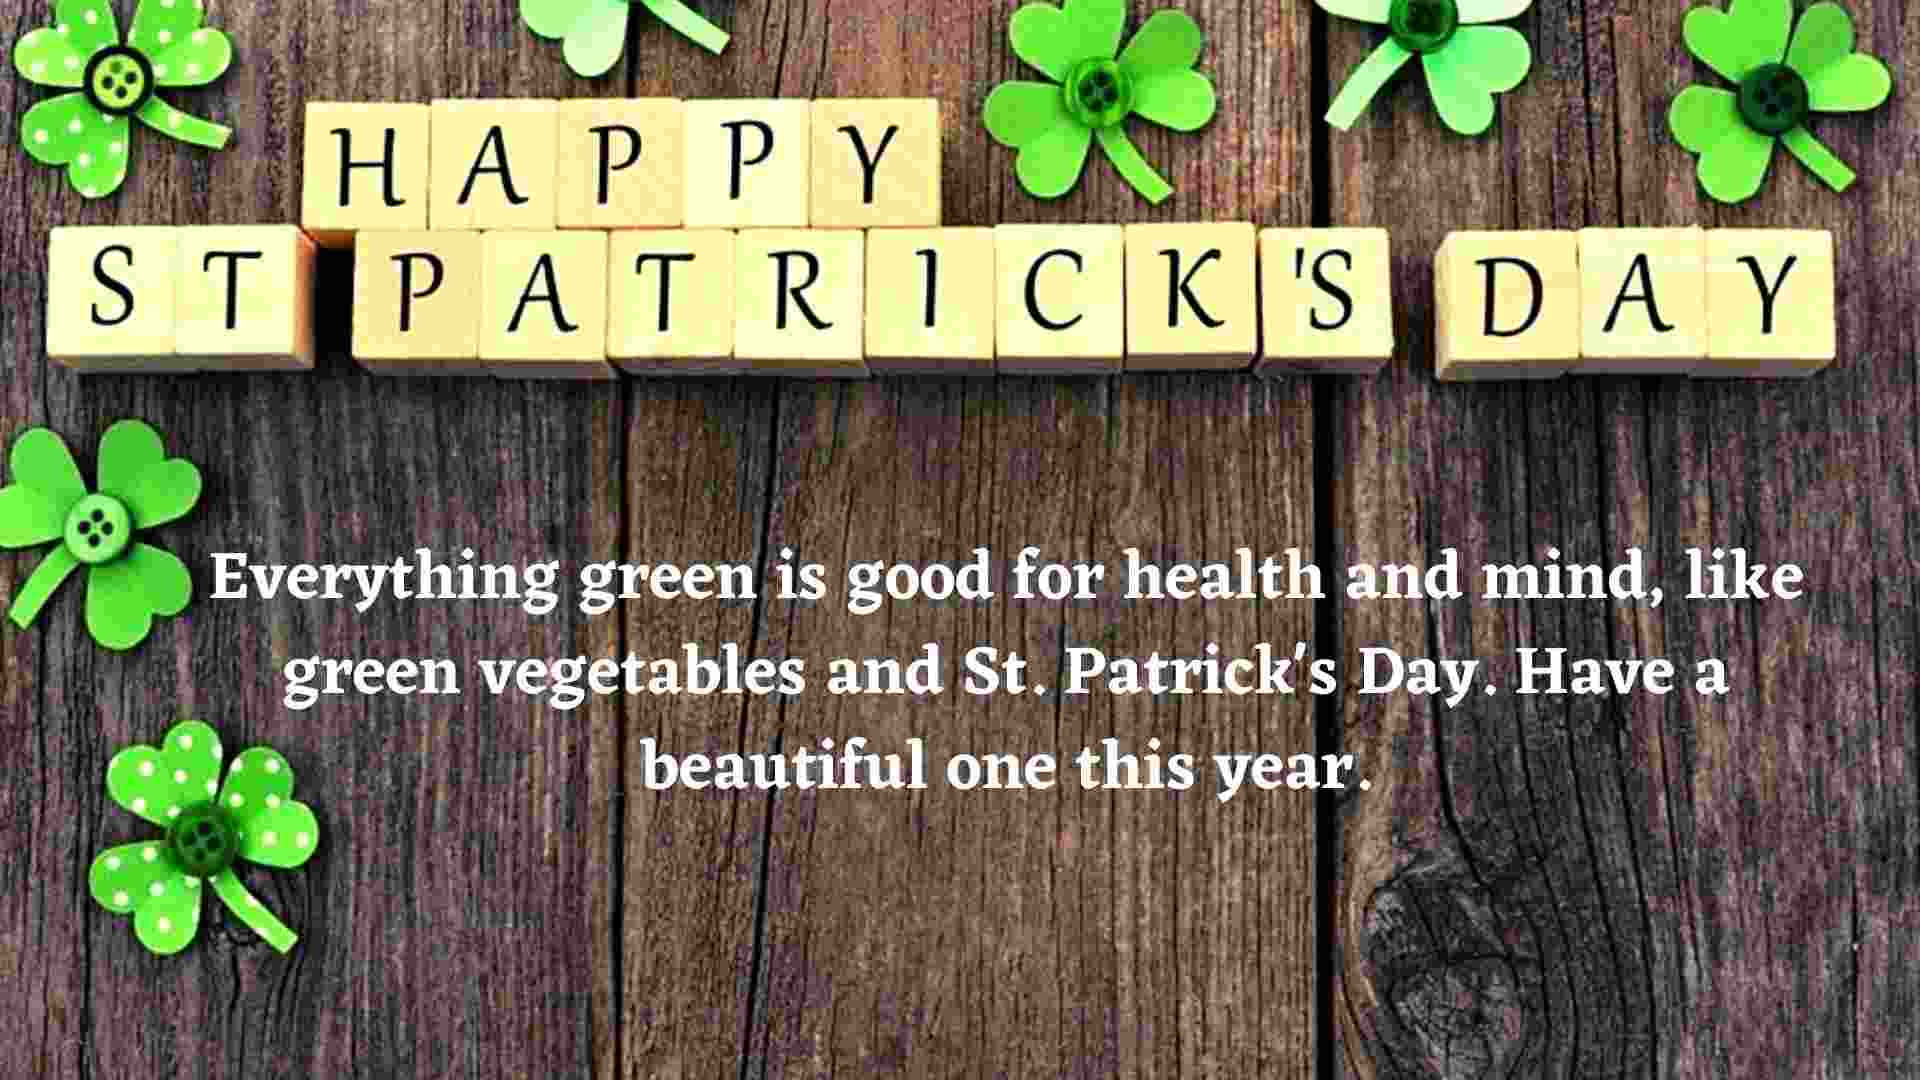 St Patricks Day 2022 Wishes | What to Write in a St Patricks Day